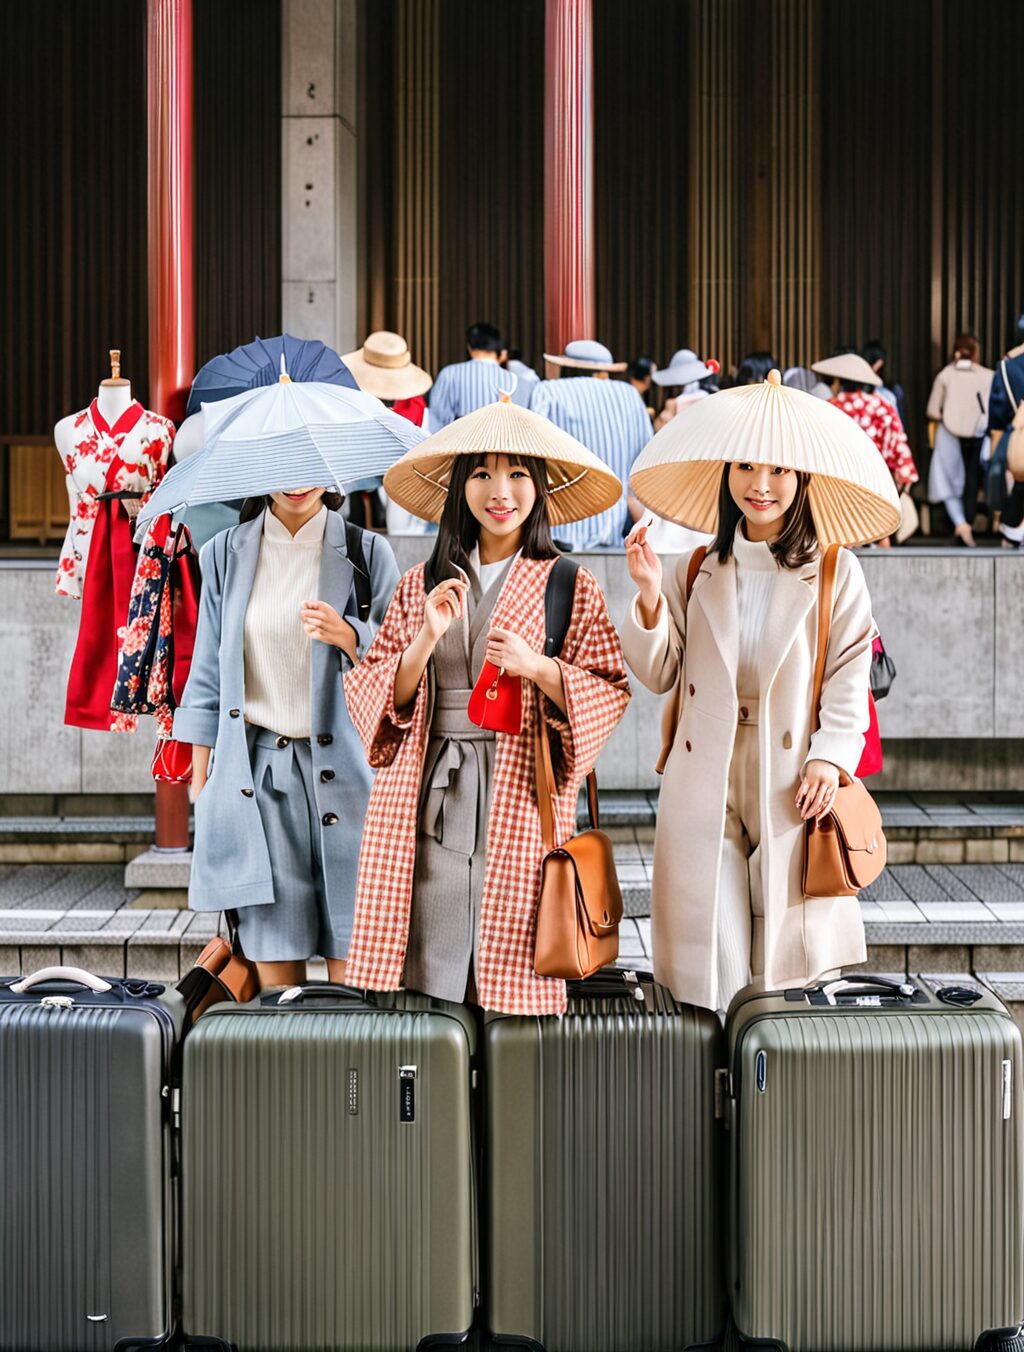 japan travel outfits